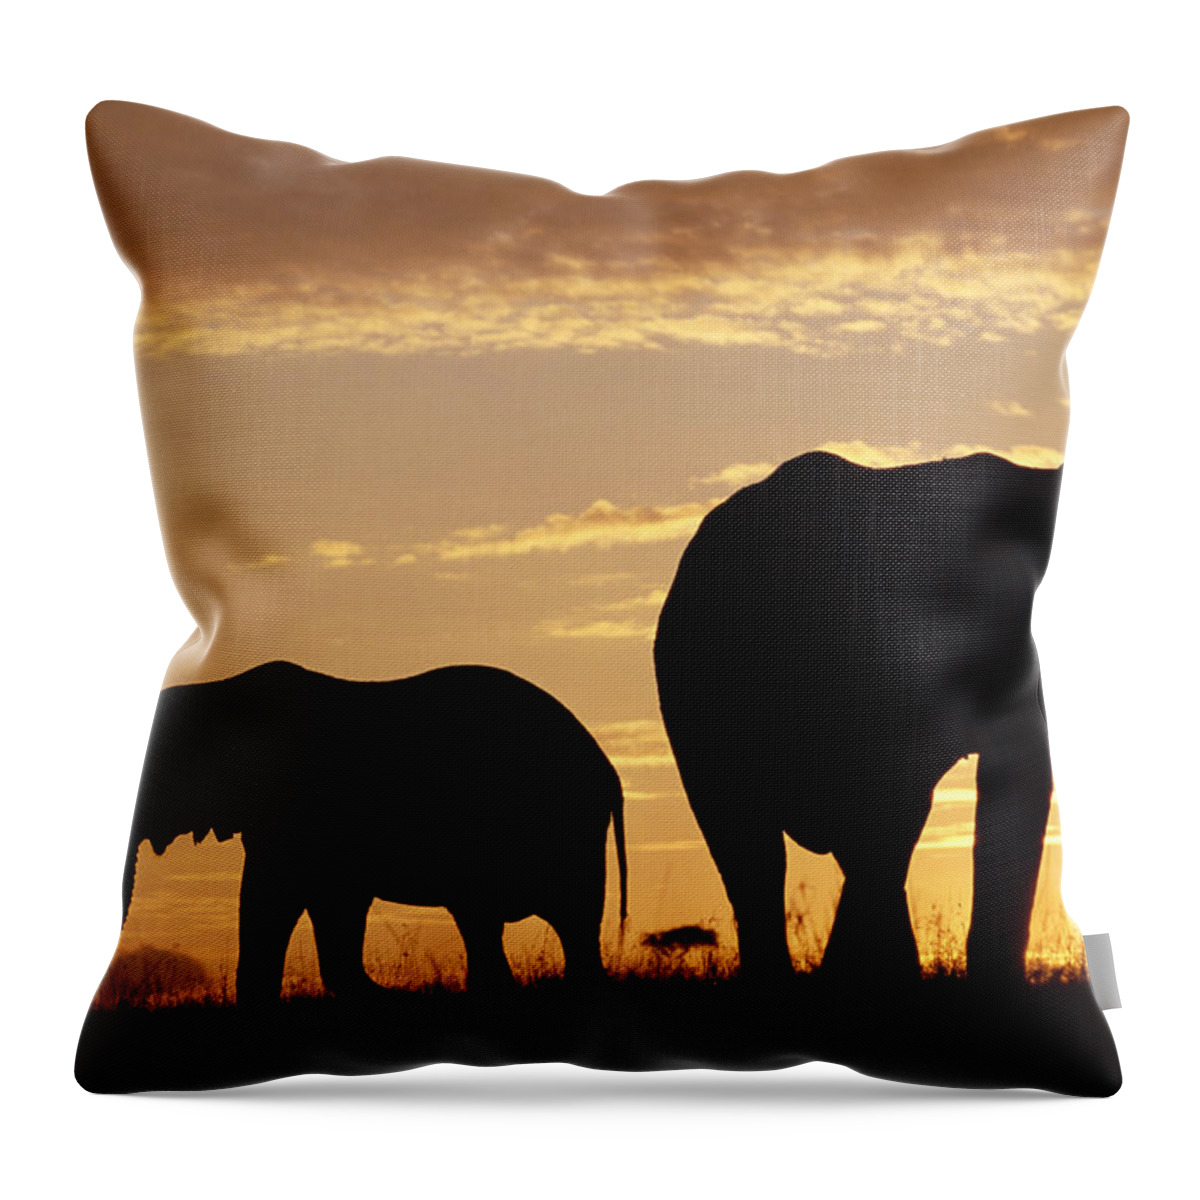 00172034 Throw Pillow featuring the photograph African Elephant Mother And Calf by Tim Fitzharris